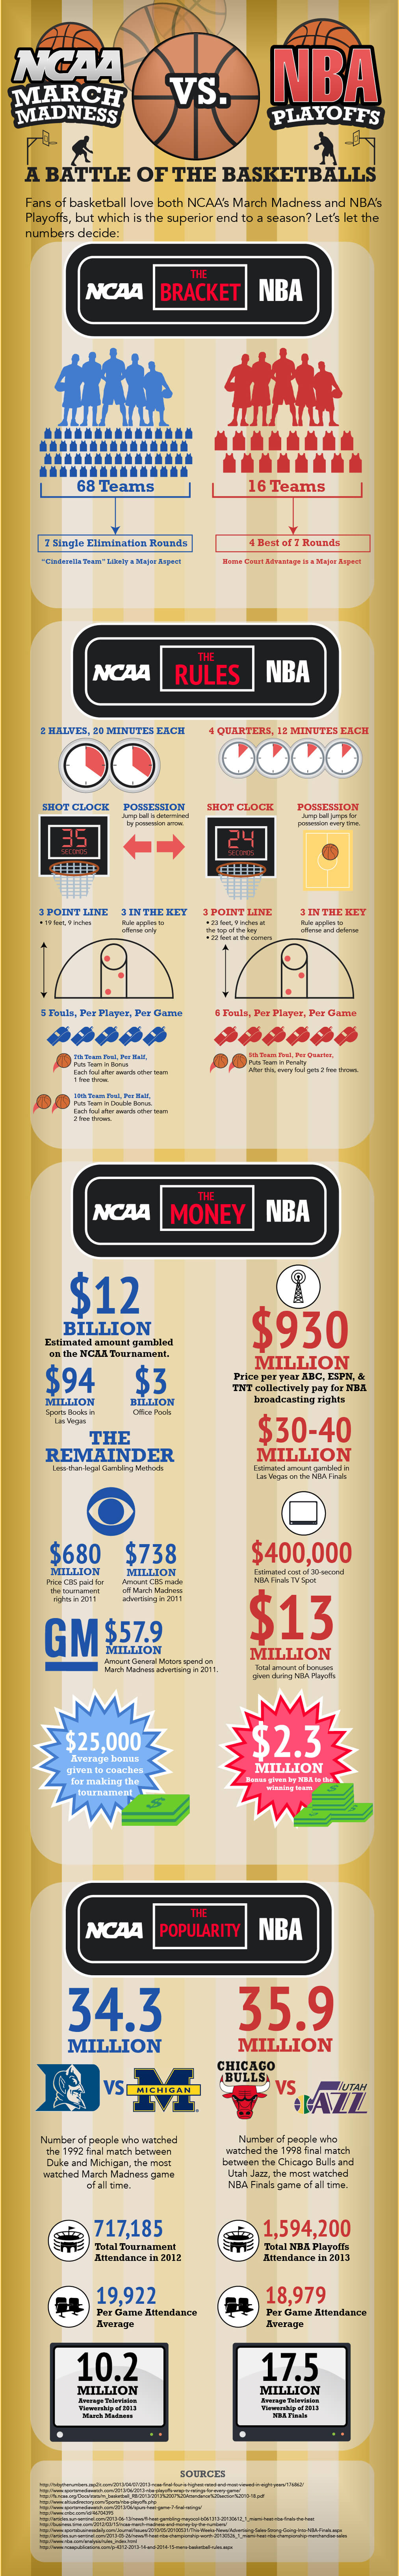 March Madness infographic